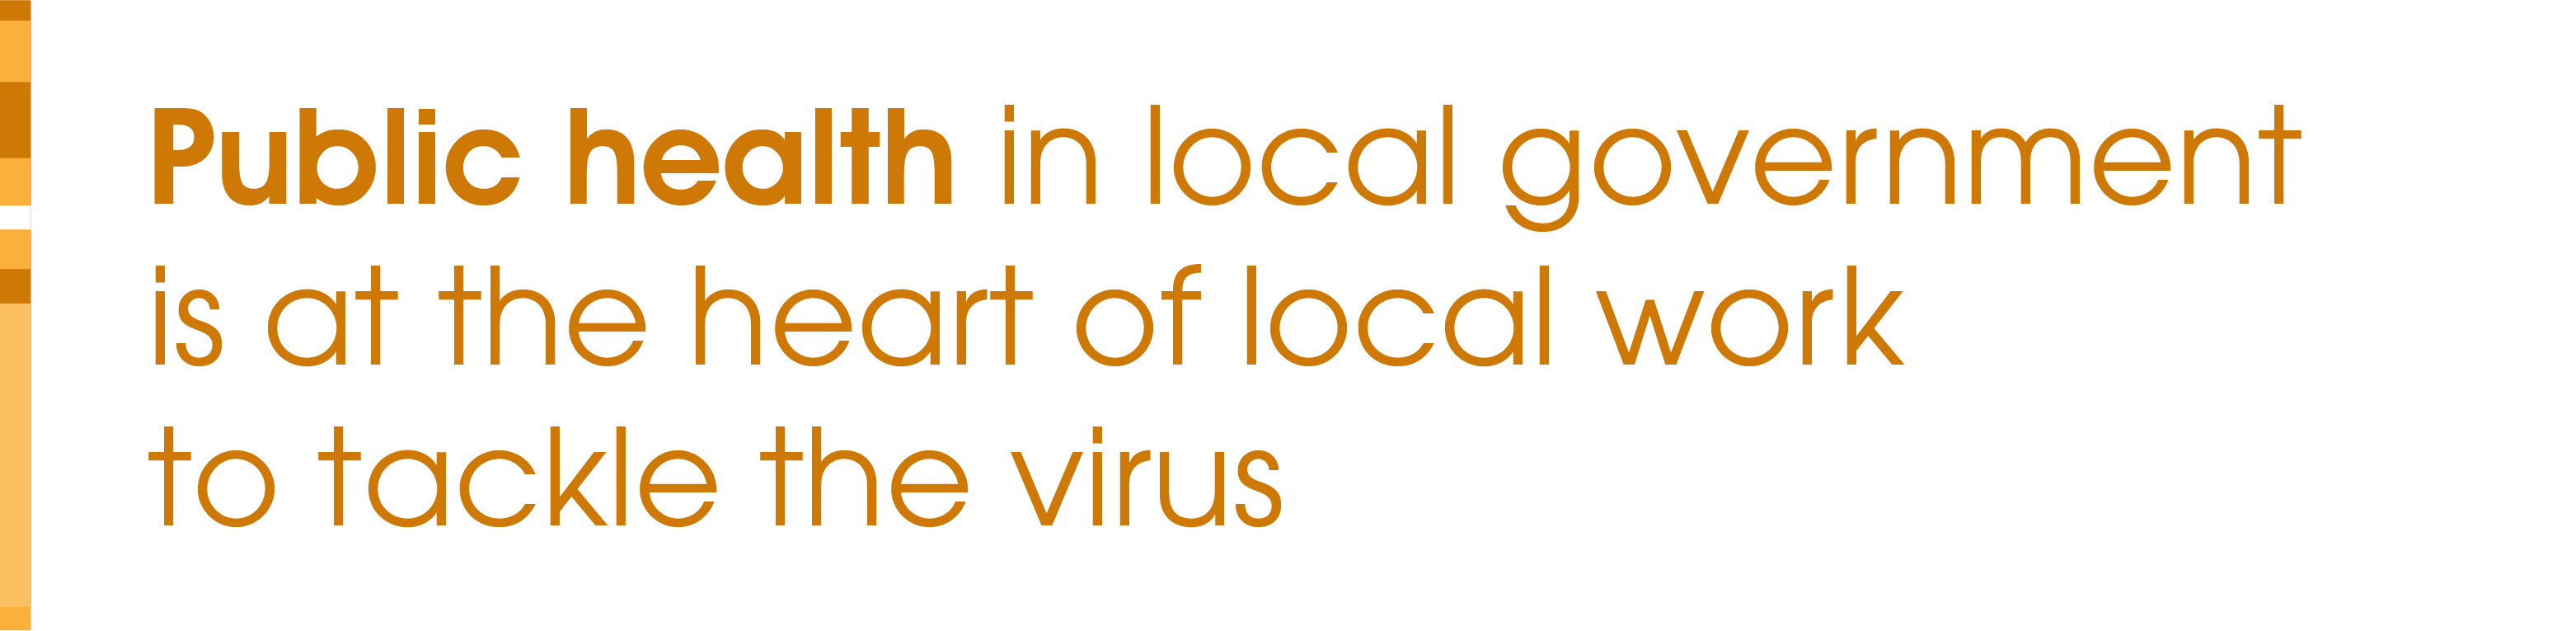 Public health in local government is at the heart of local work to tackle the virus.